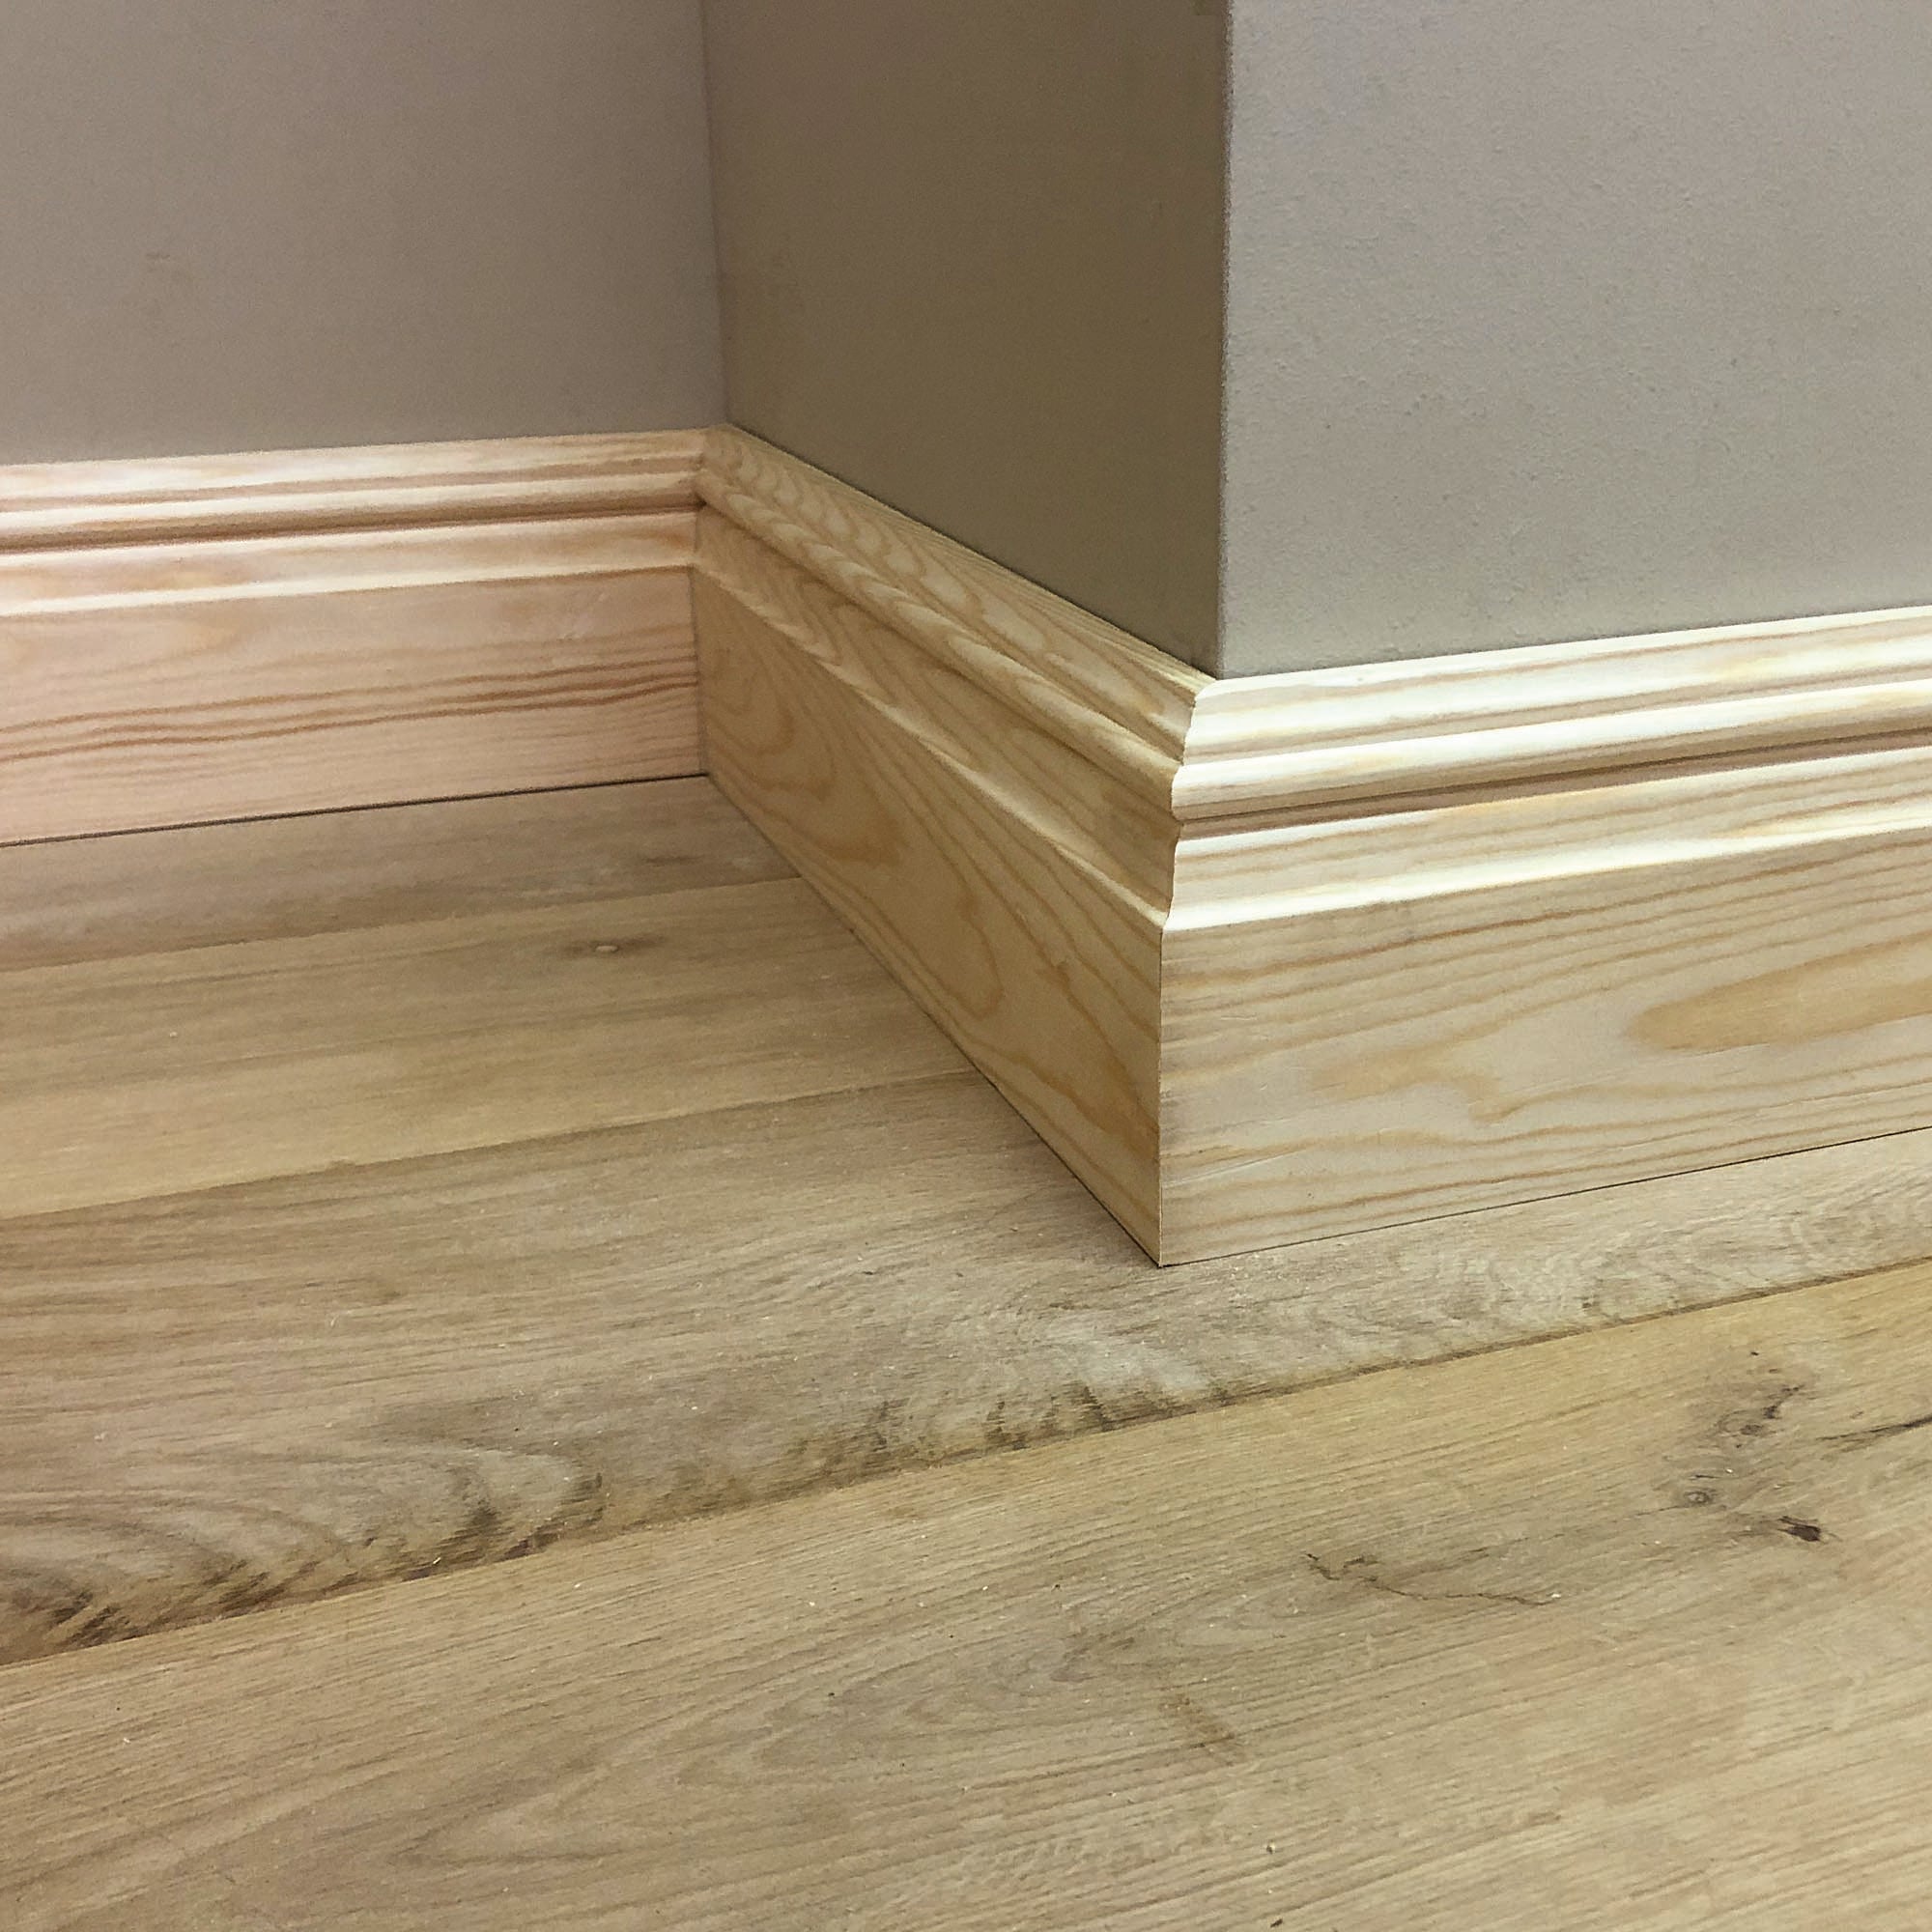 Discover more than 77 victorian skirting board best